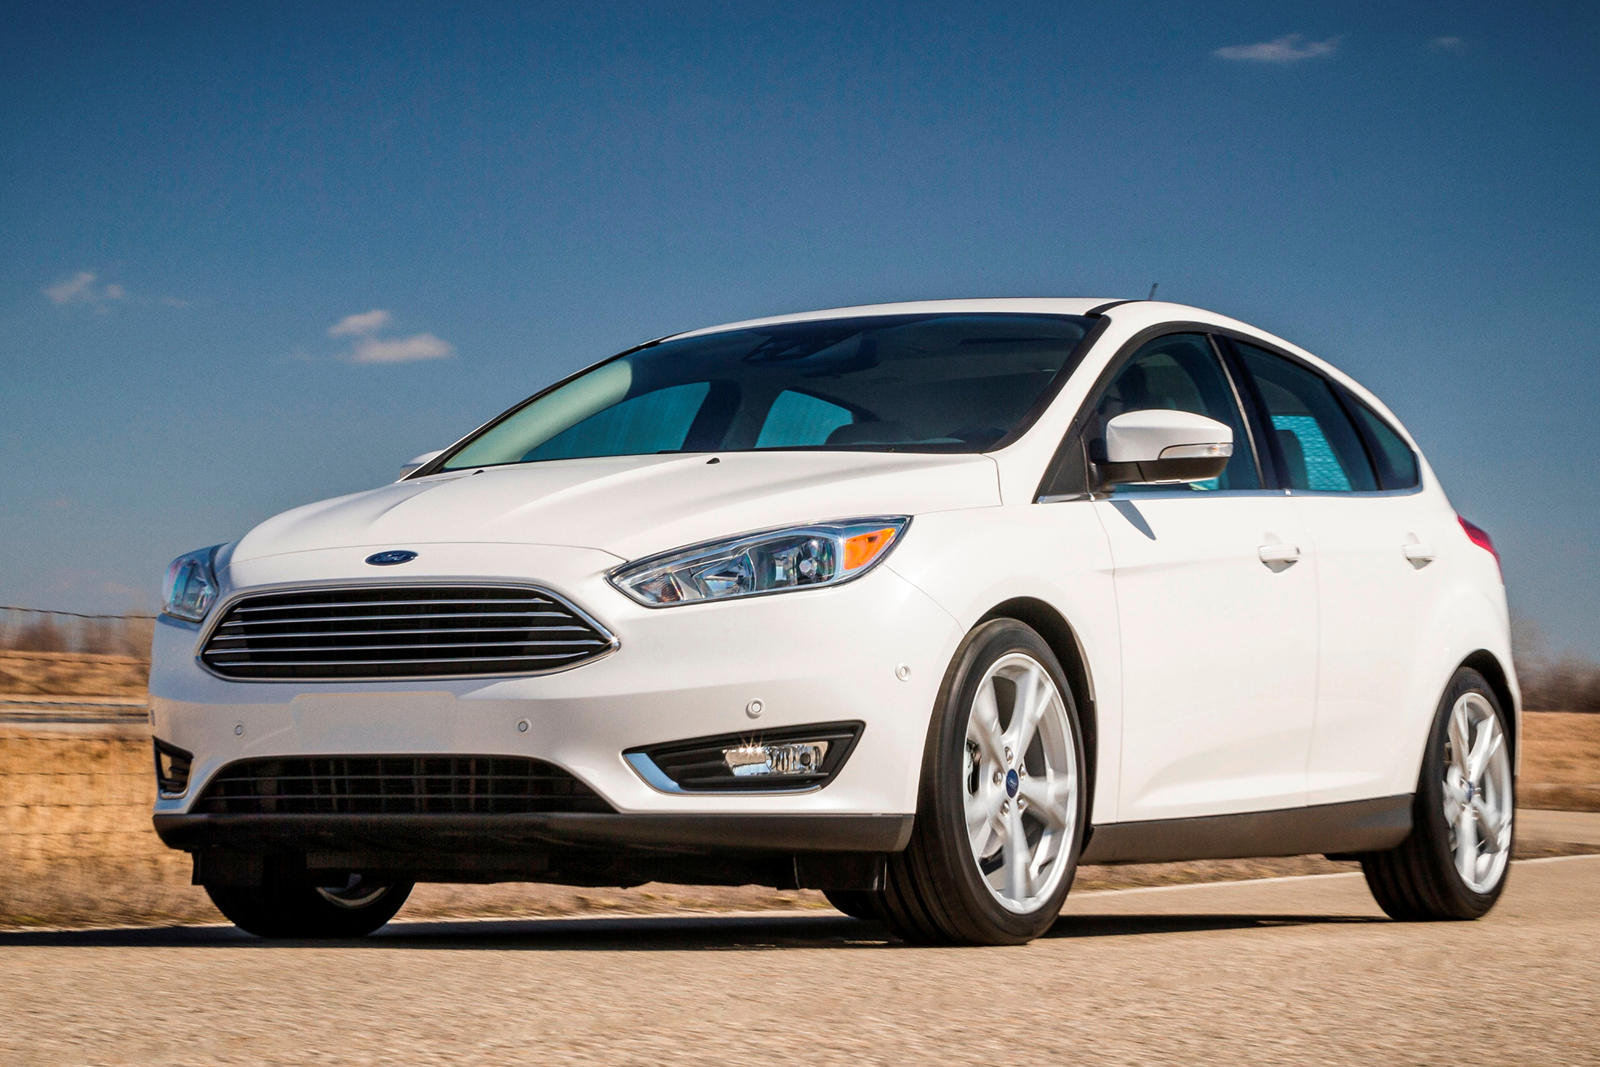 2018 Ford Focus Hatchback Review, Trims, Specs, Price, New Interior